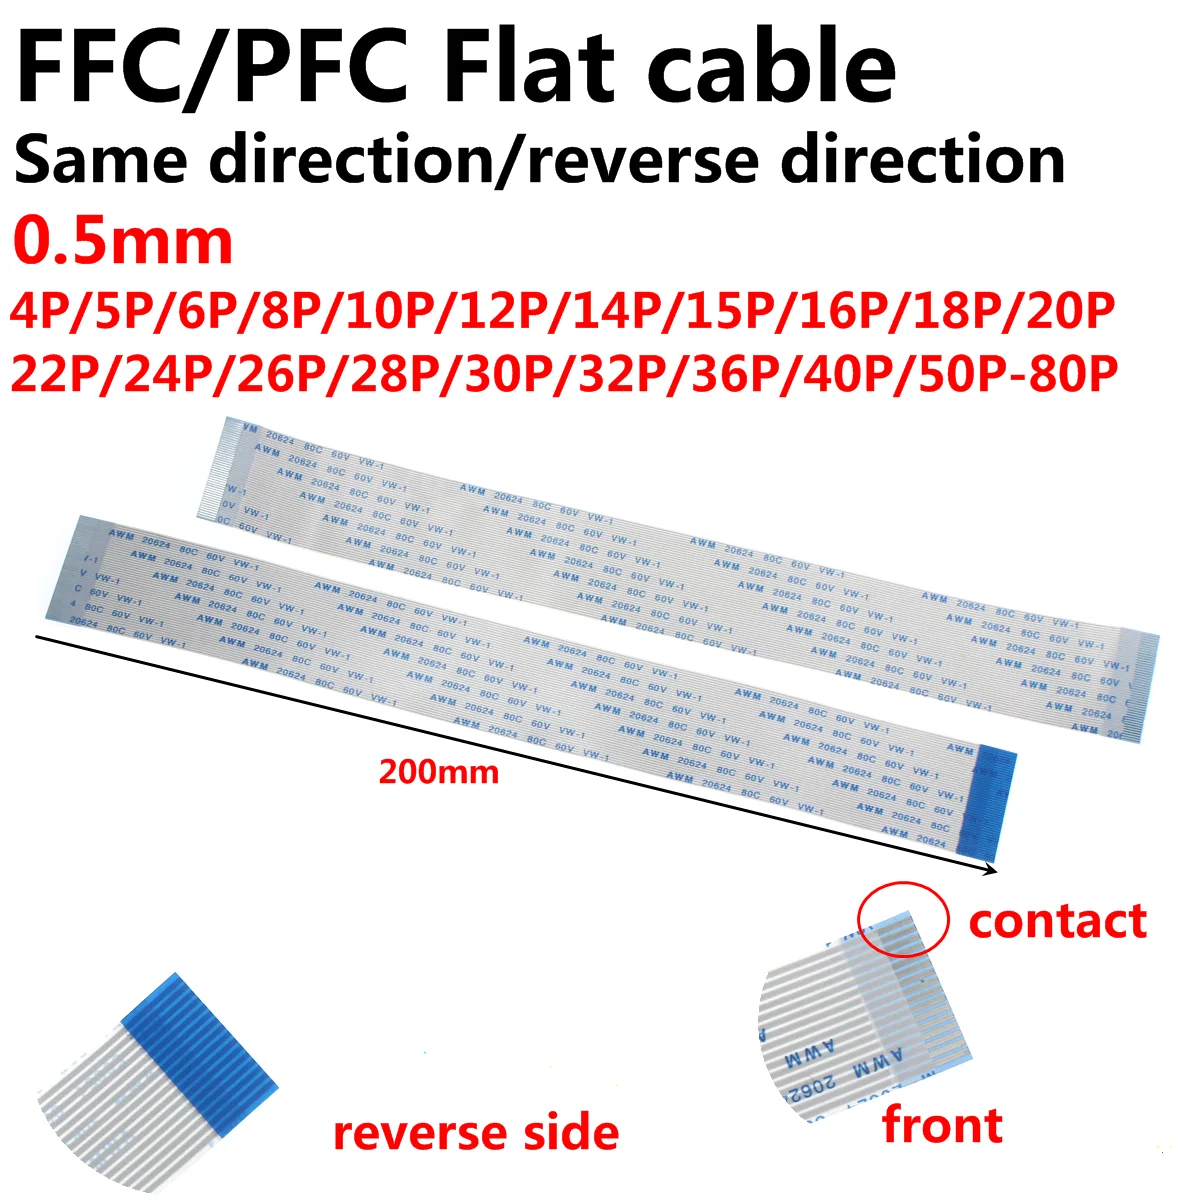 20Pcs FPC Flexible Flat Cable FFC 0.5MM 200MM 20cm A B type interface 4P 5P 6P 8P 10P 12P 14P 16P 18P 20P 22P 24P-40P 15cm 32pin 0 5pitch 25mm 150mm a type flexible flat cable ffc awm 20624 rohs for ttl lcd dvd computer